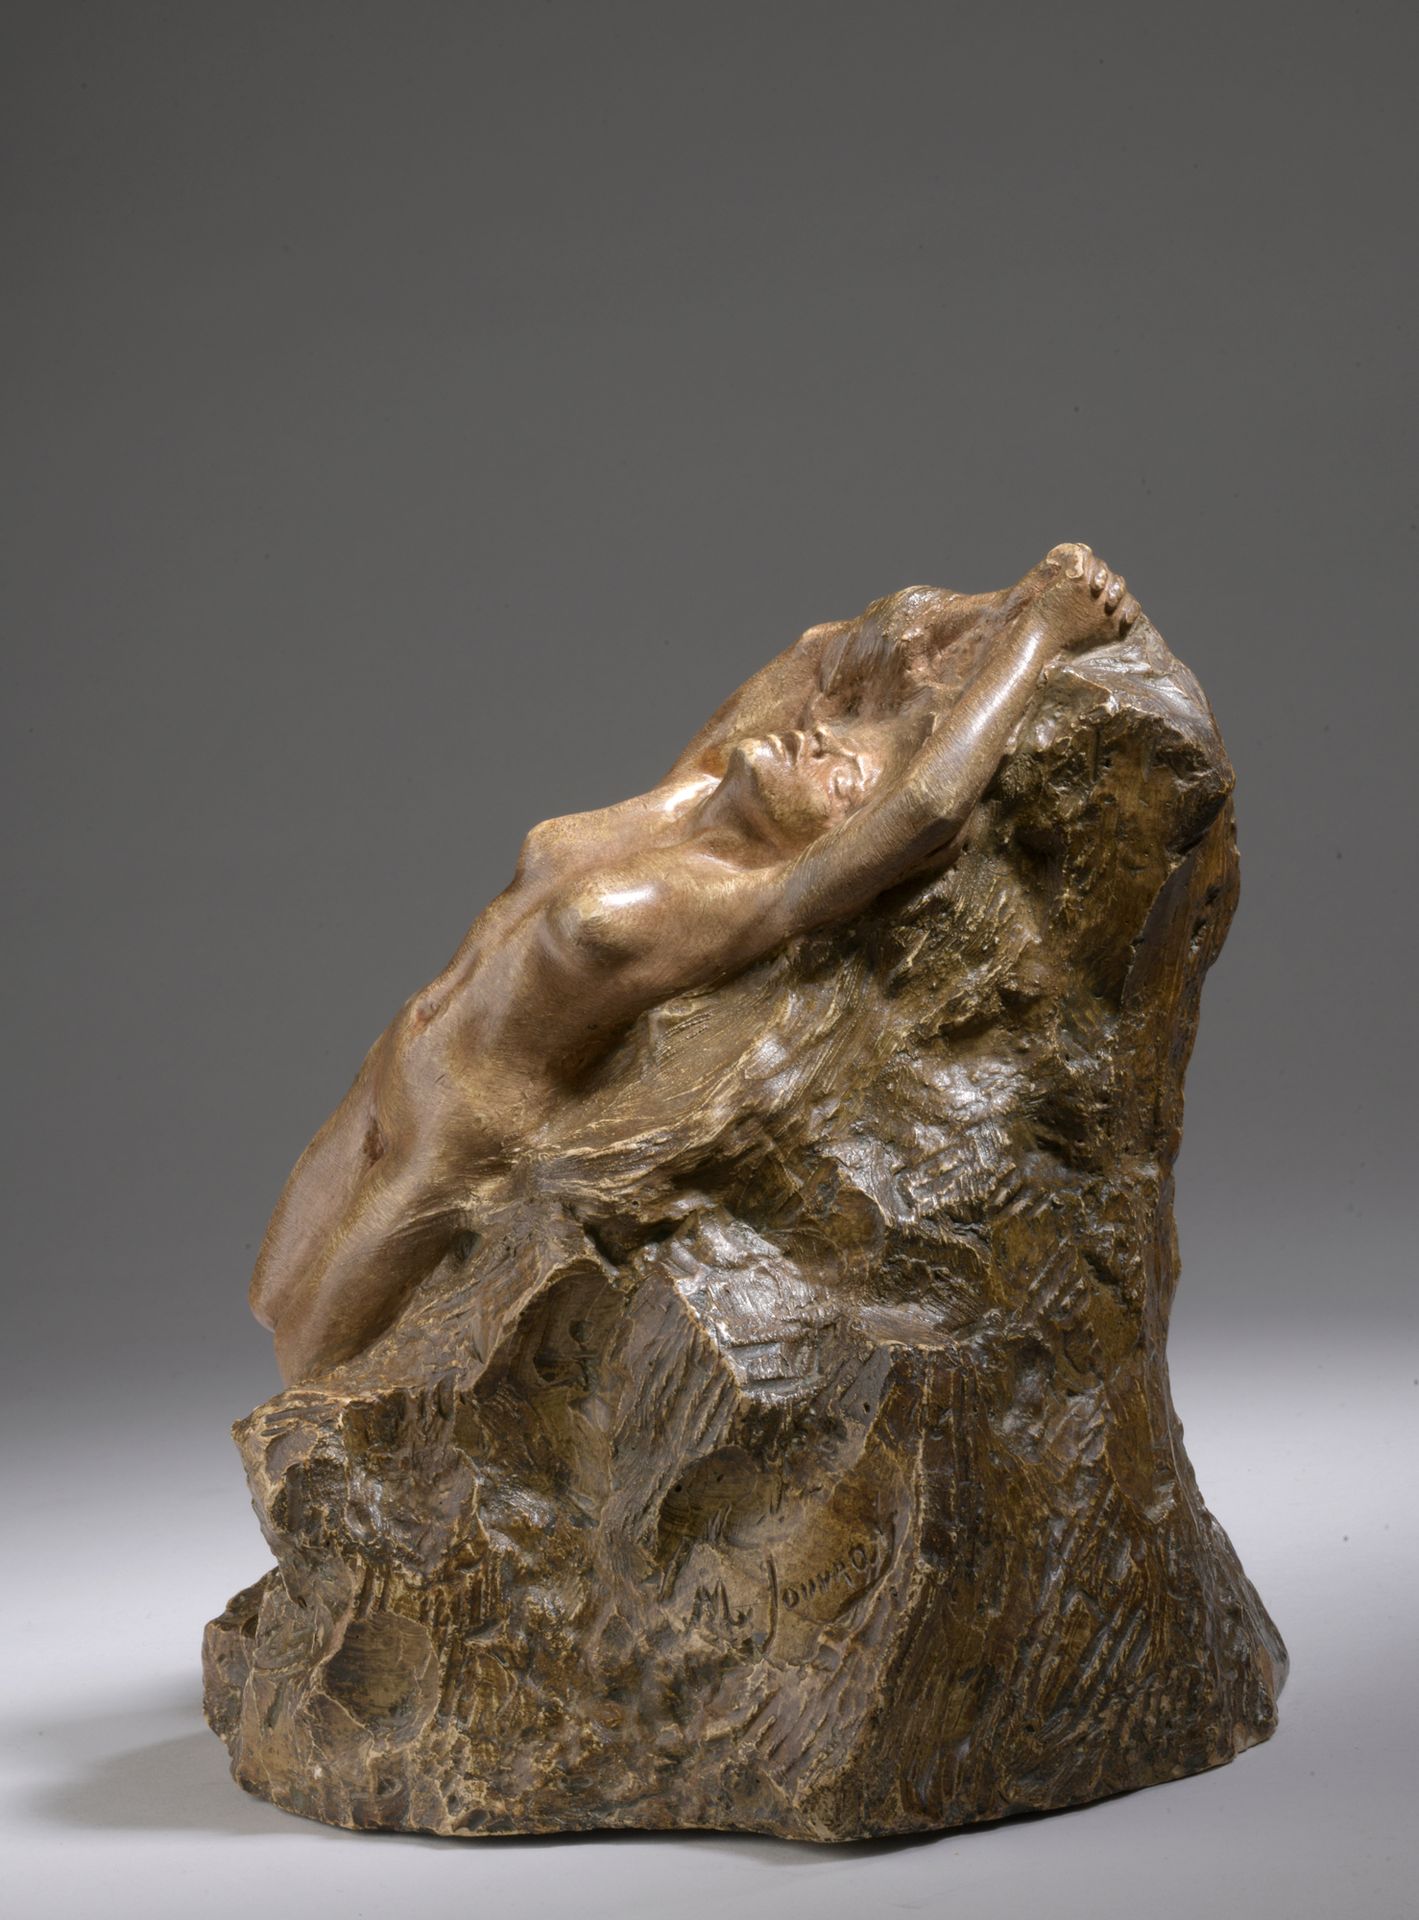 Null Madeleine JOUVRAY (1862-1935)

Andromeda tied to her rock

Patinated plaste&hellip;